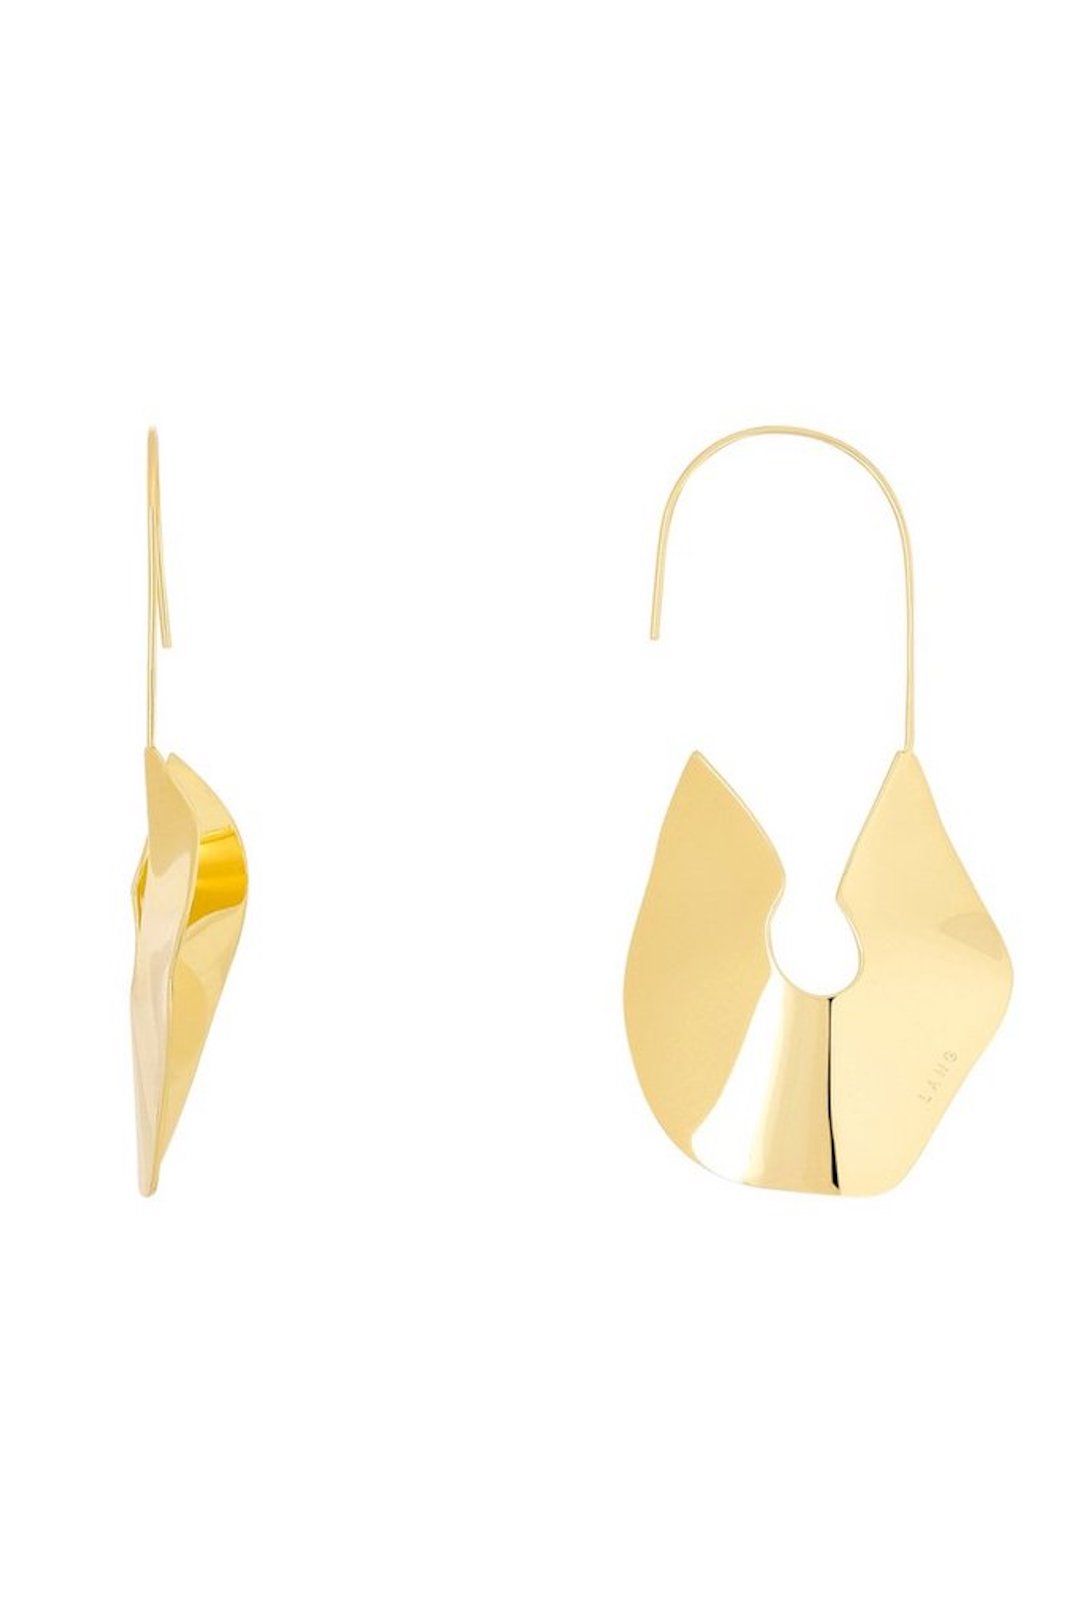 Peter Lang -  Agnes Earring - Gold - Product